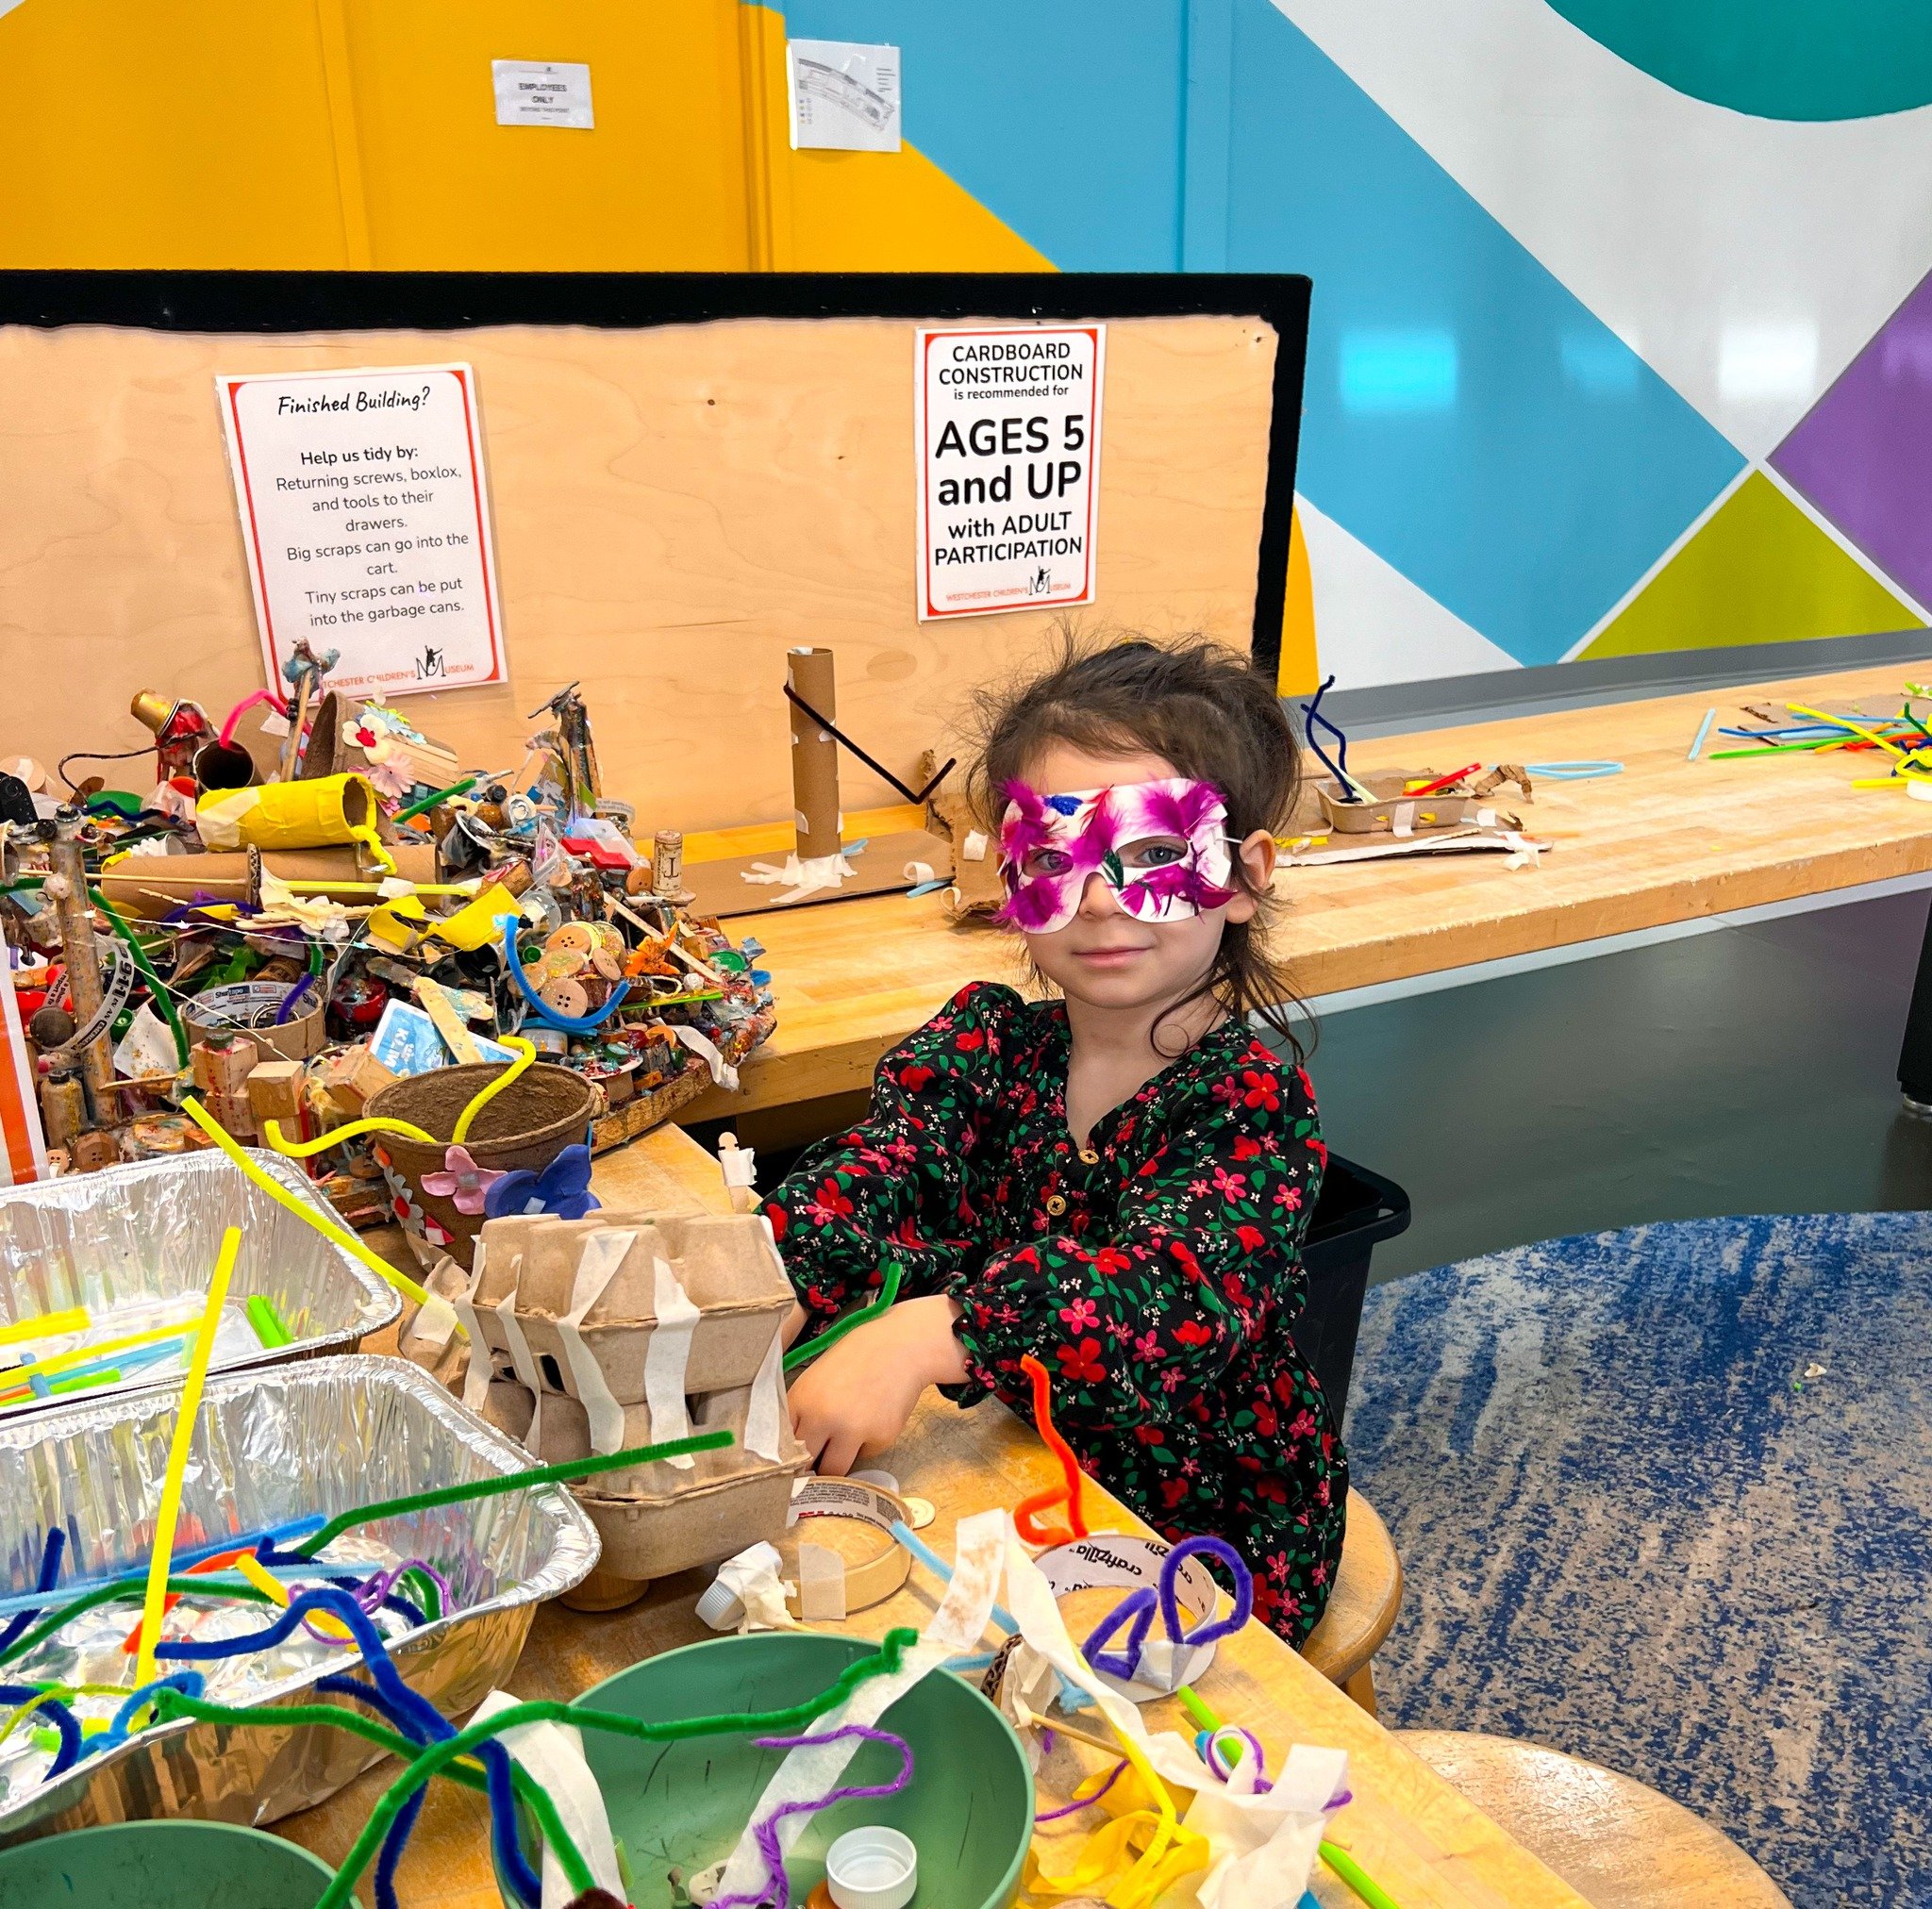 Throwback Thursday to our recent Big Weekend Event (Earth Day Weekend) 
.
.
Get excited for MAKER WEEKEND (May 18th and 19th) 
#DiscoverWCM 
#WestchesterChildrensMuseum
#WestchesterFamily
#WestchesterKids
#StemEducation
#PlayToLearn
#ImaginationIsKey